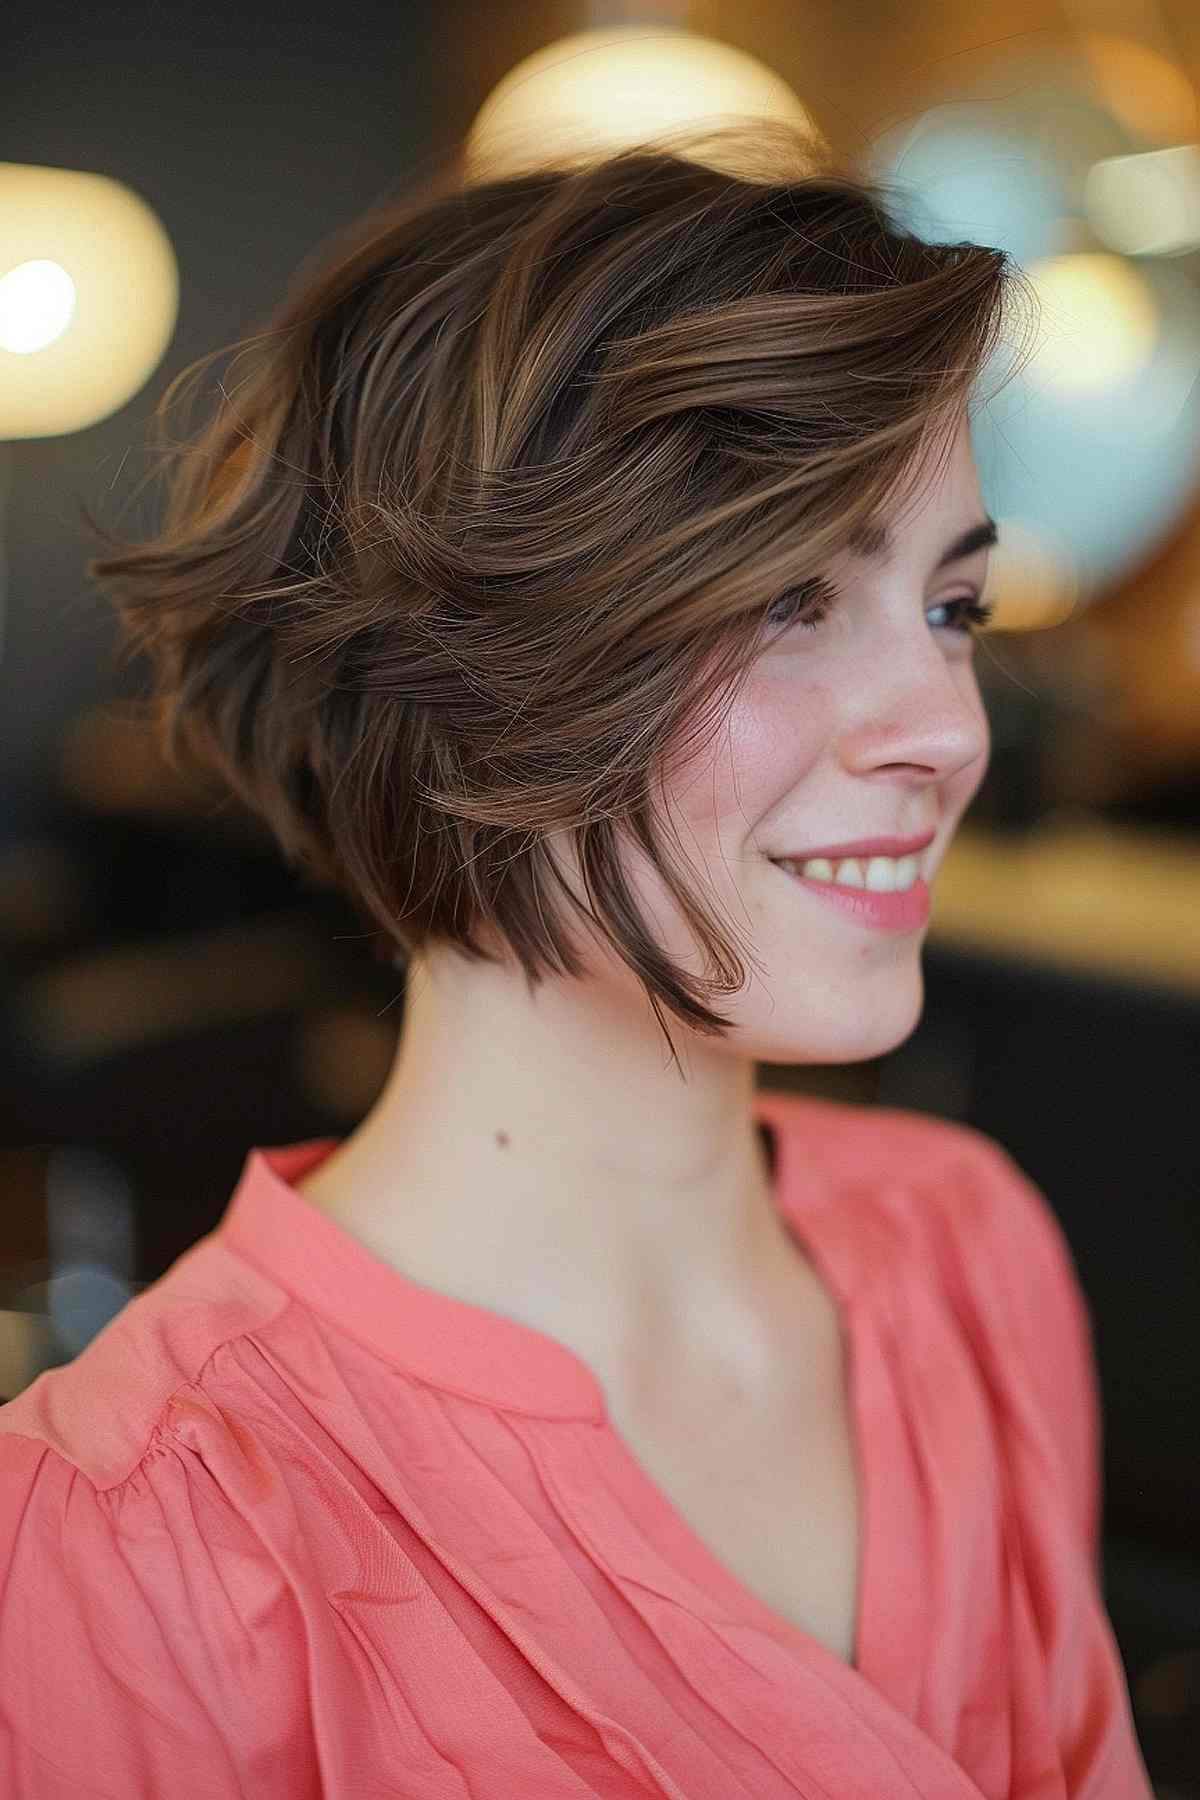 A feathery A-line bob with chin-length hair and soft, fluffy ends.